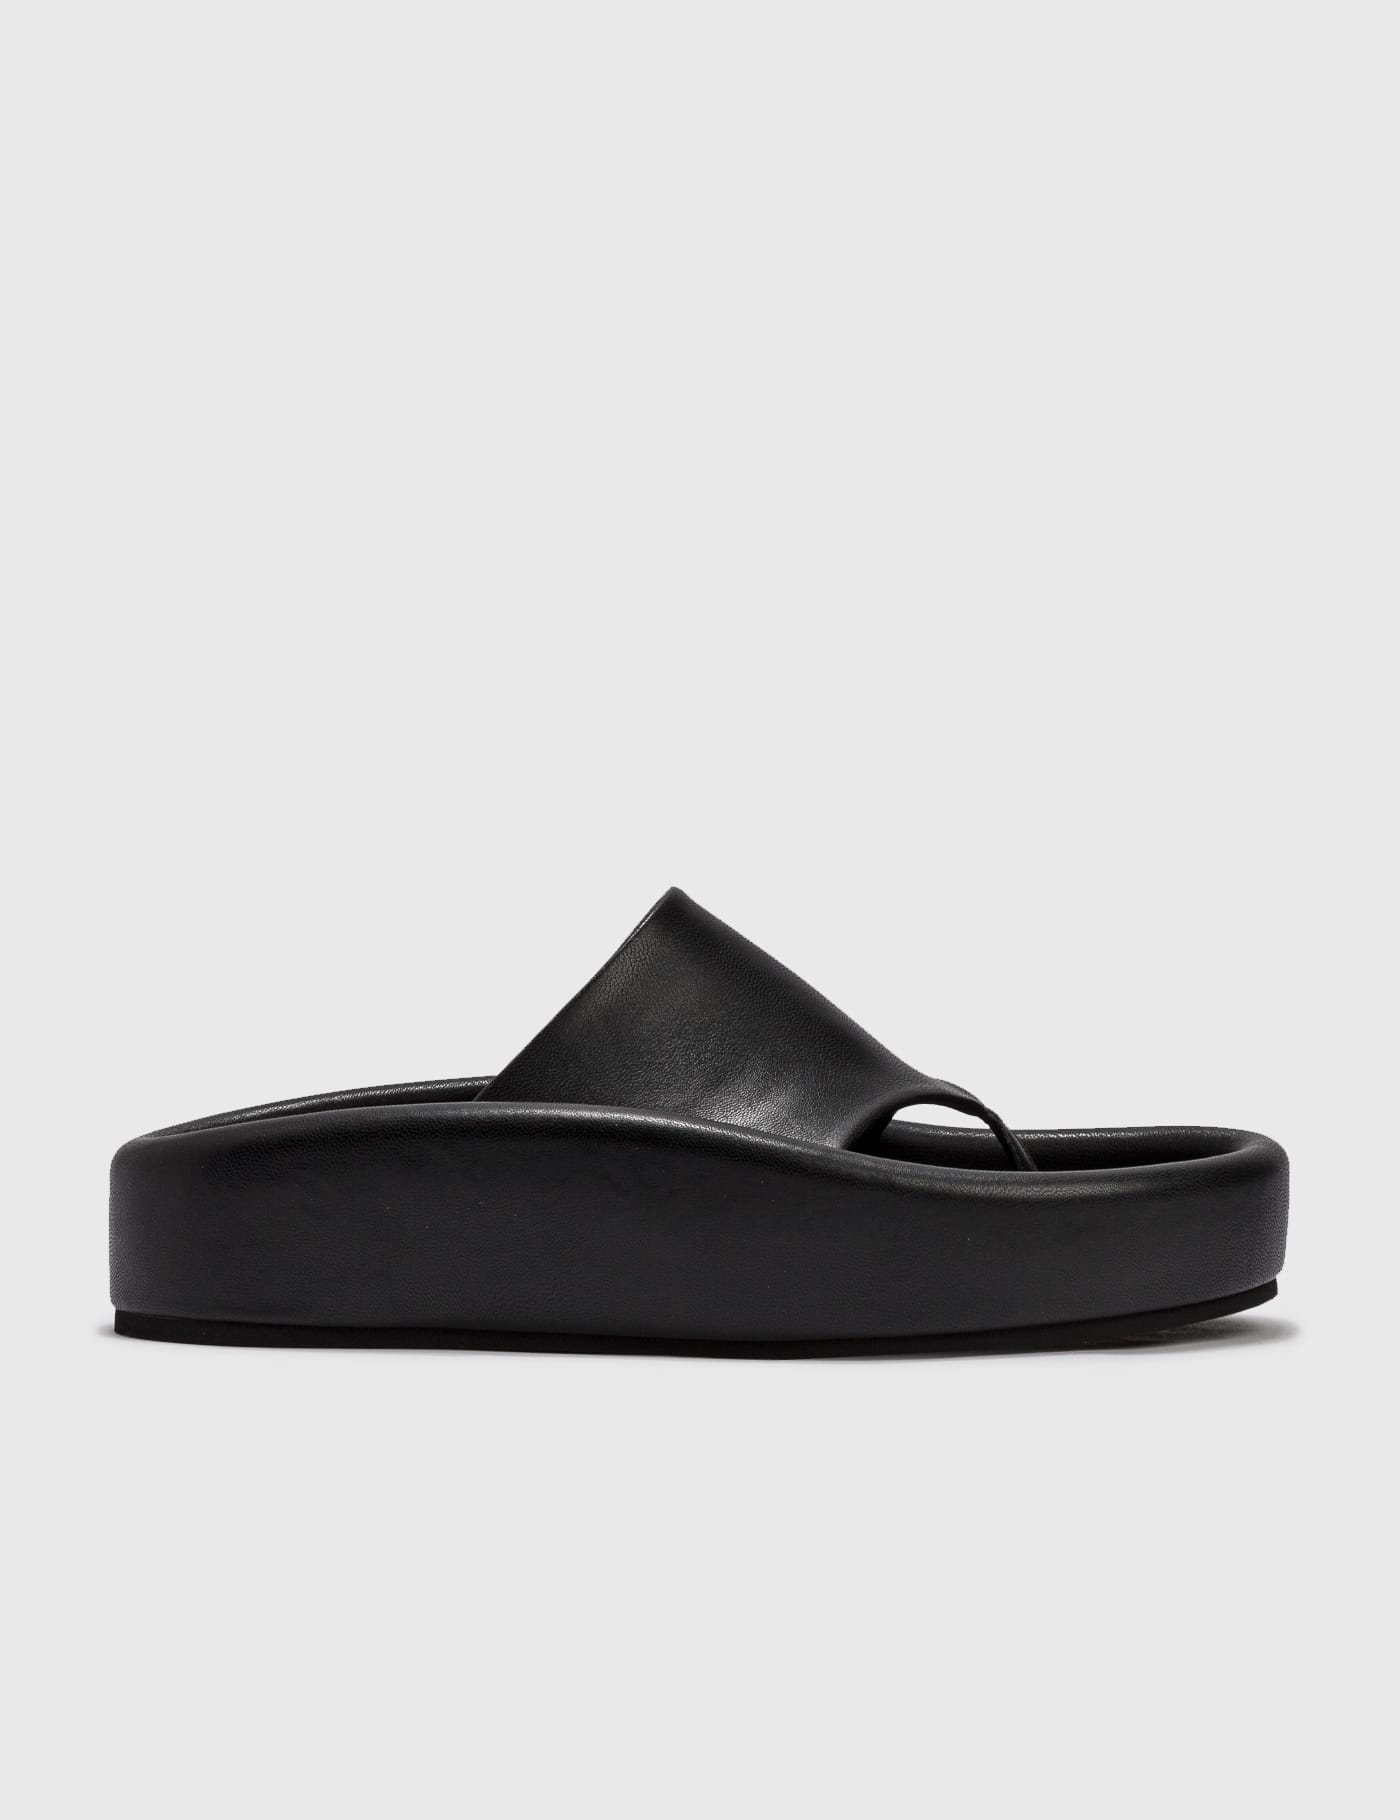 MM6 Maison Margiela - Wedge Sandals | HBX - Globally Curated